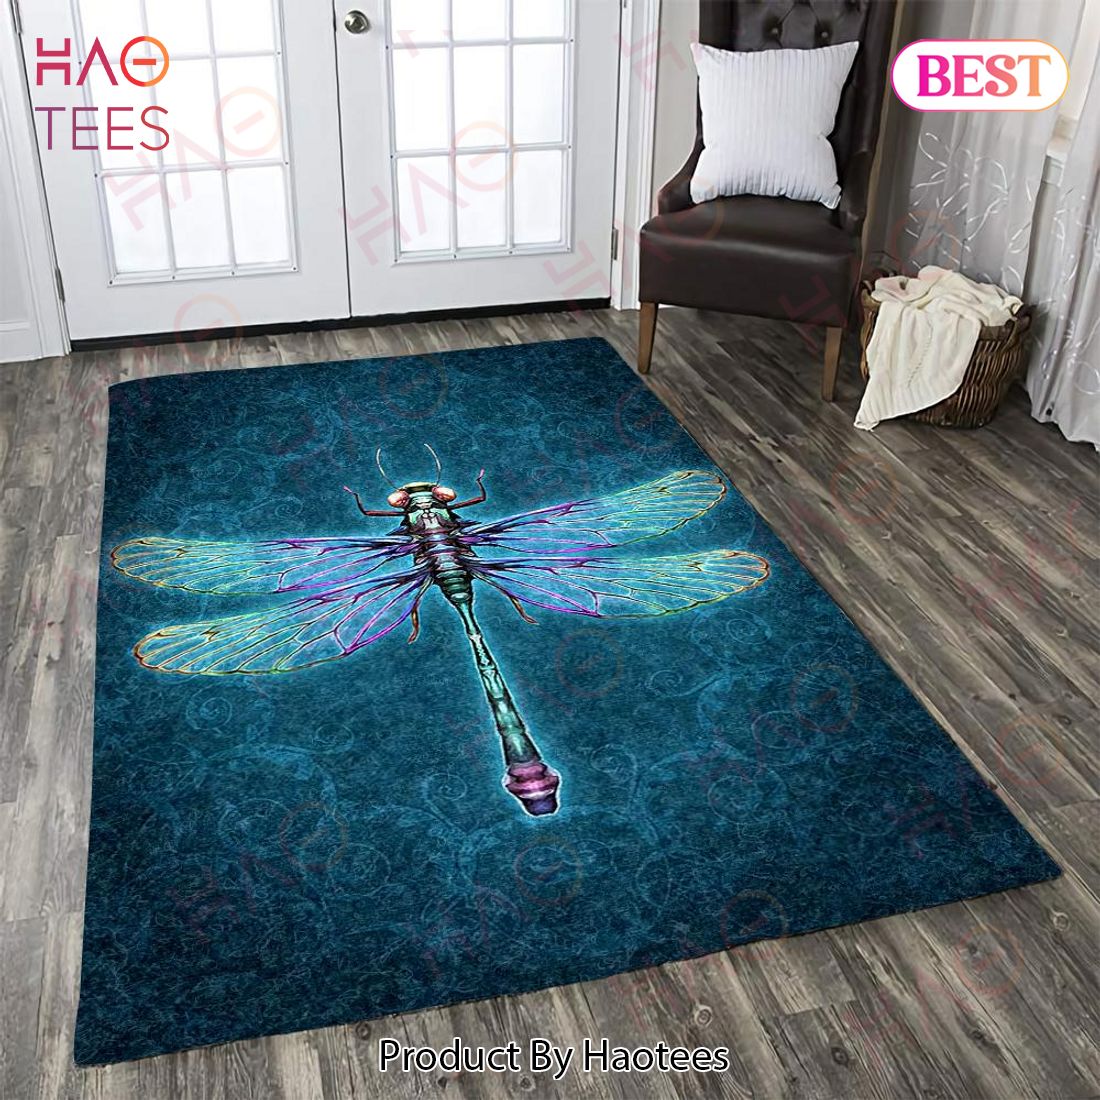 Dragonfly Tdt Limited Edition Area Rugs Carpet Mat Kitchen Rugs Floor Decor